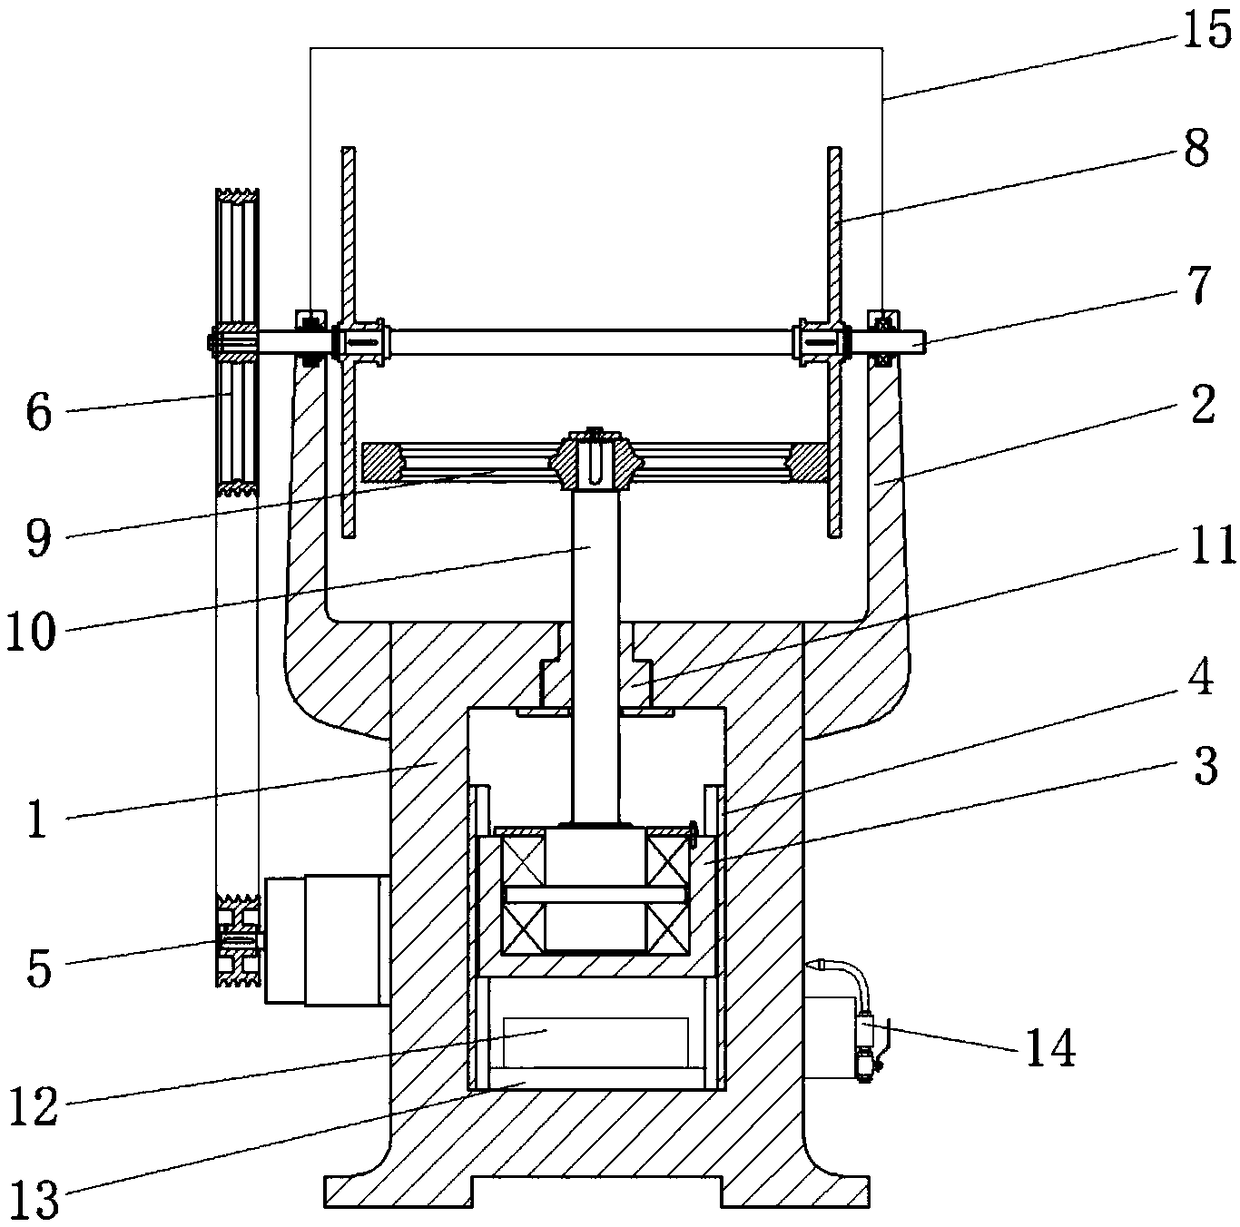 High-temperature-resistant friction press for hardware machining